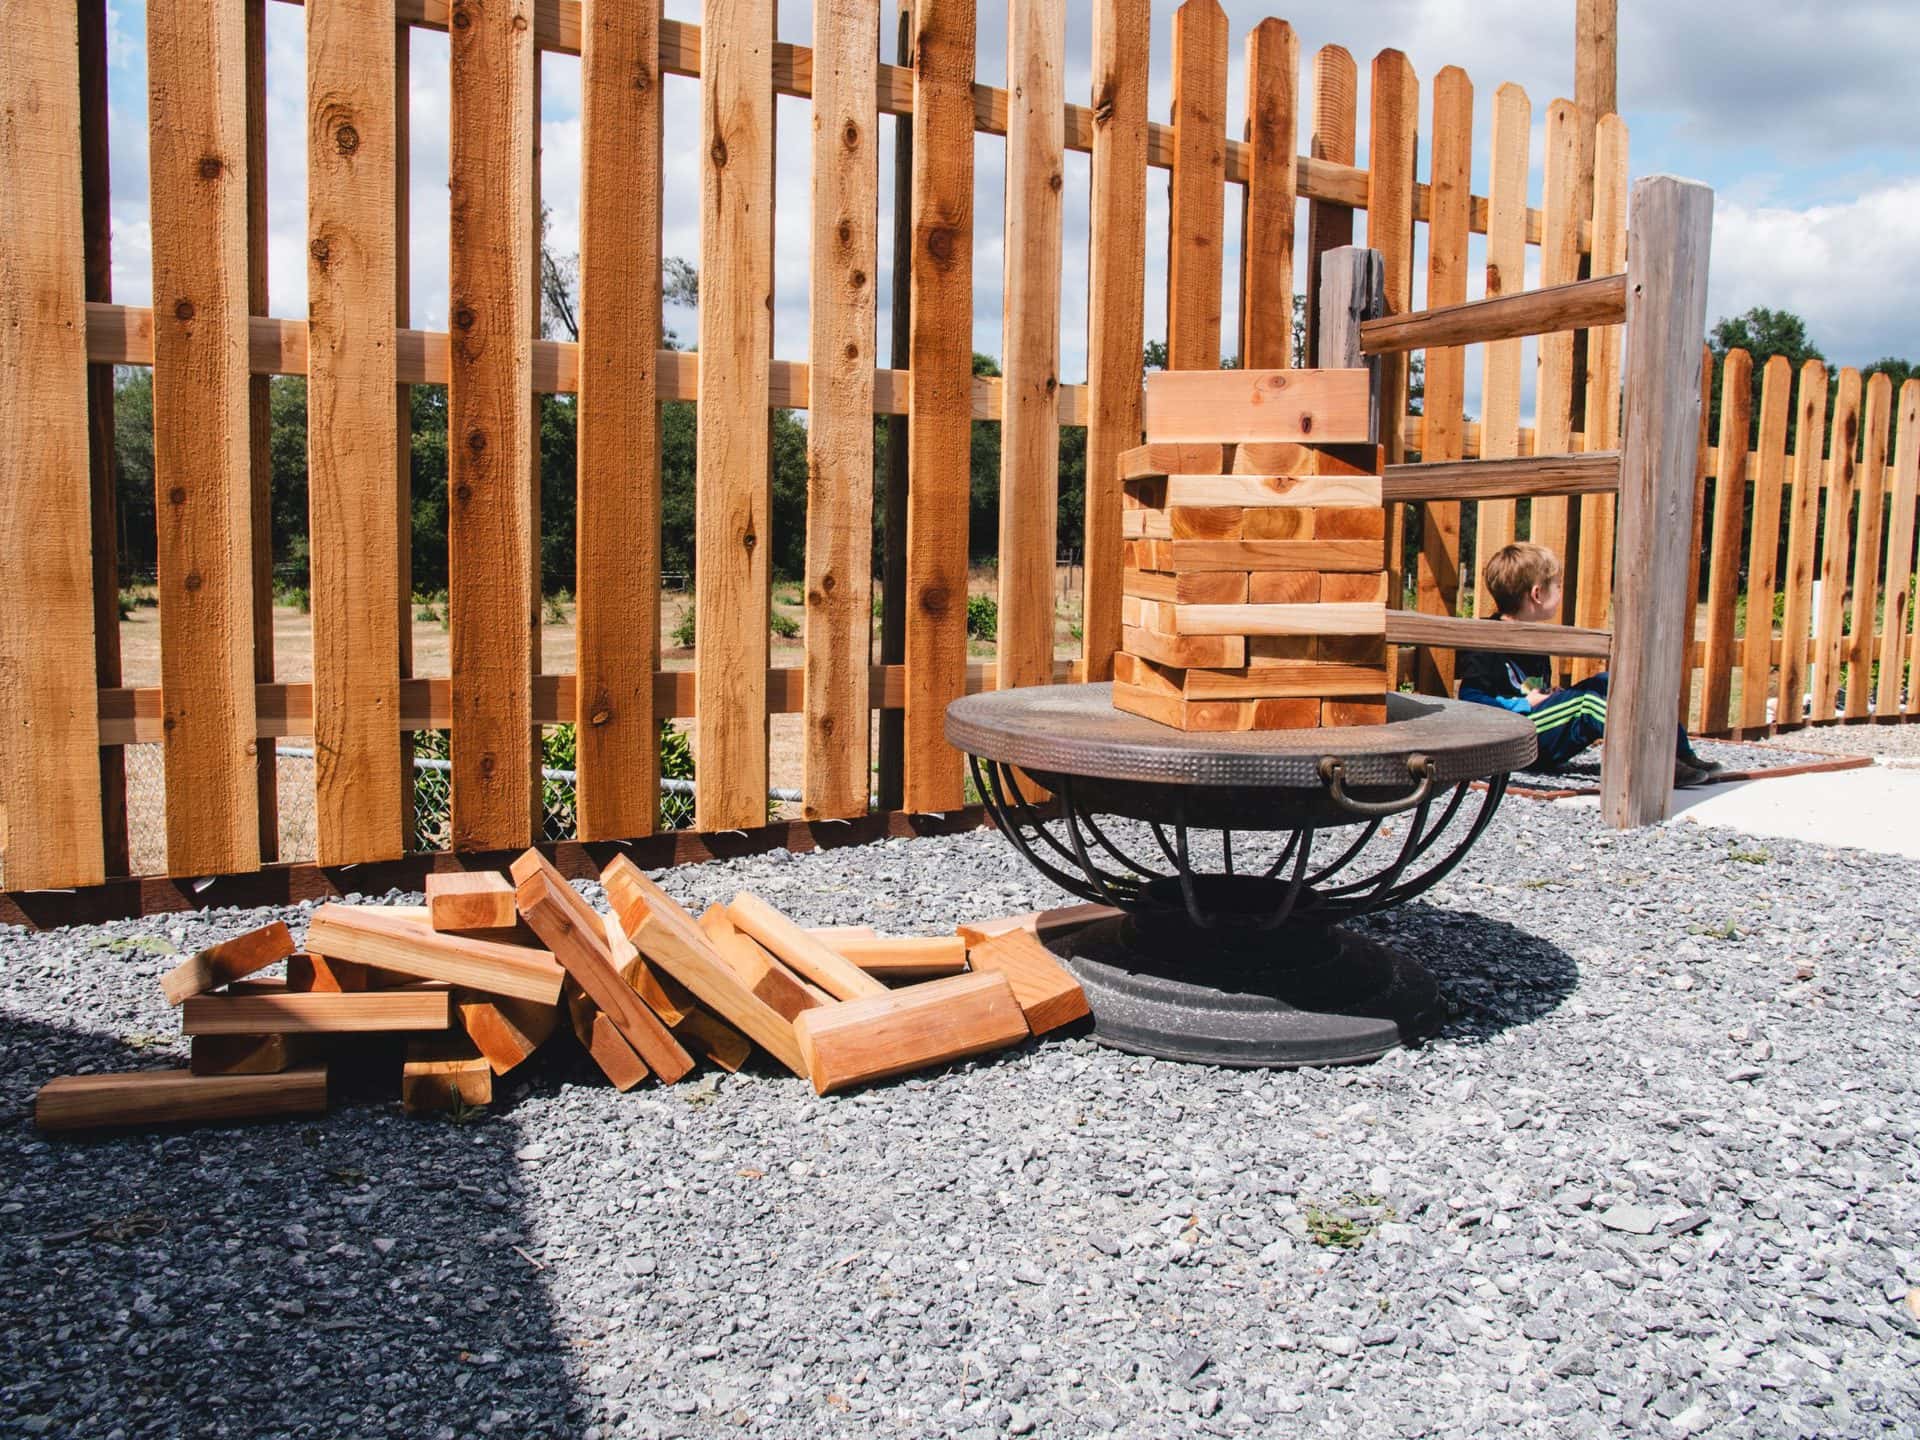 wooden fence services near front royal